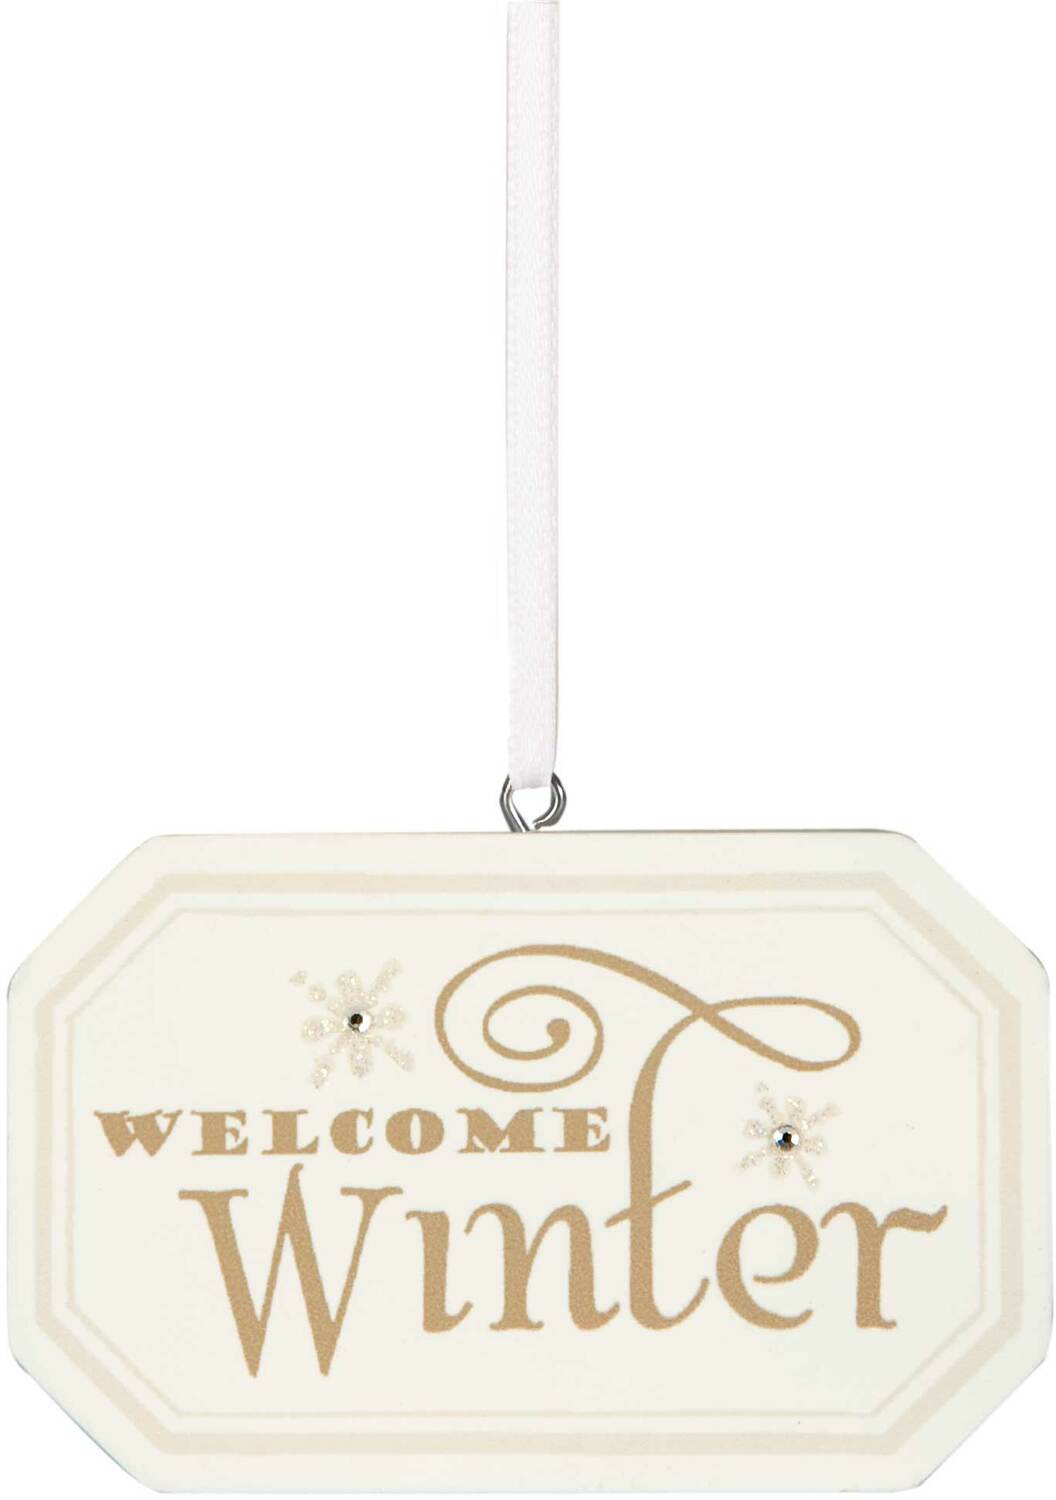 Welcome Winter by Signs of Happiness - Welcome Winter - 3" x 2" Hanging Plaque